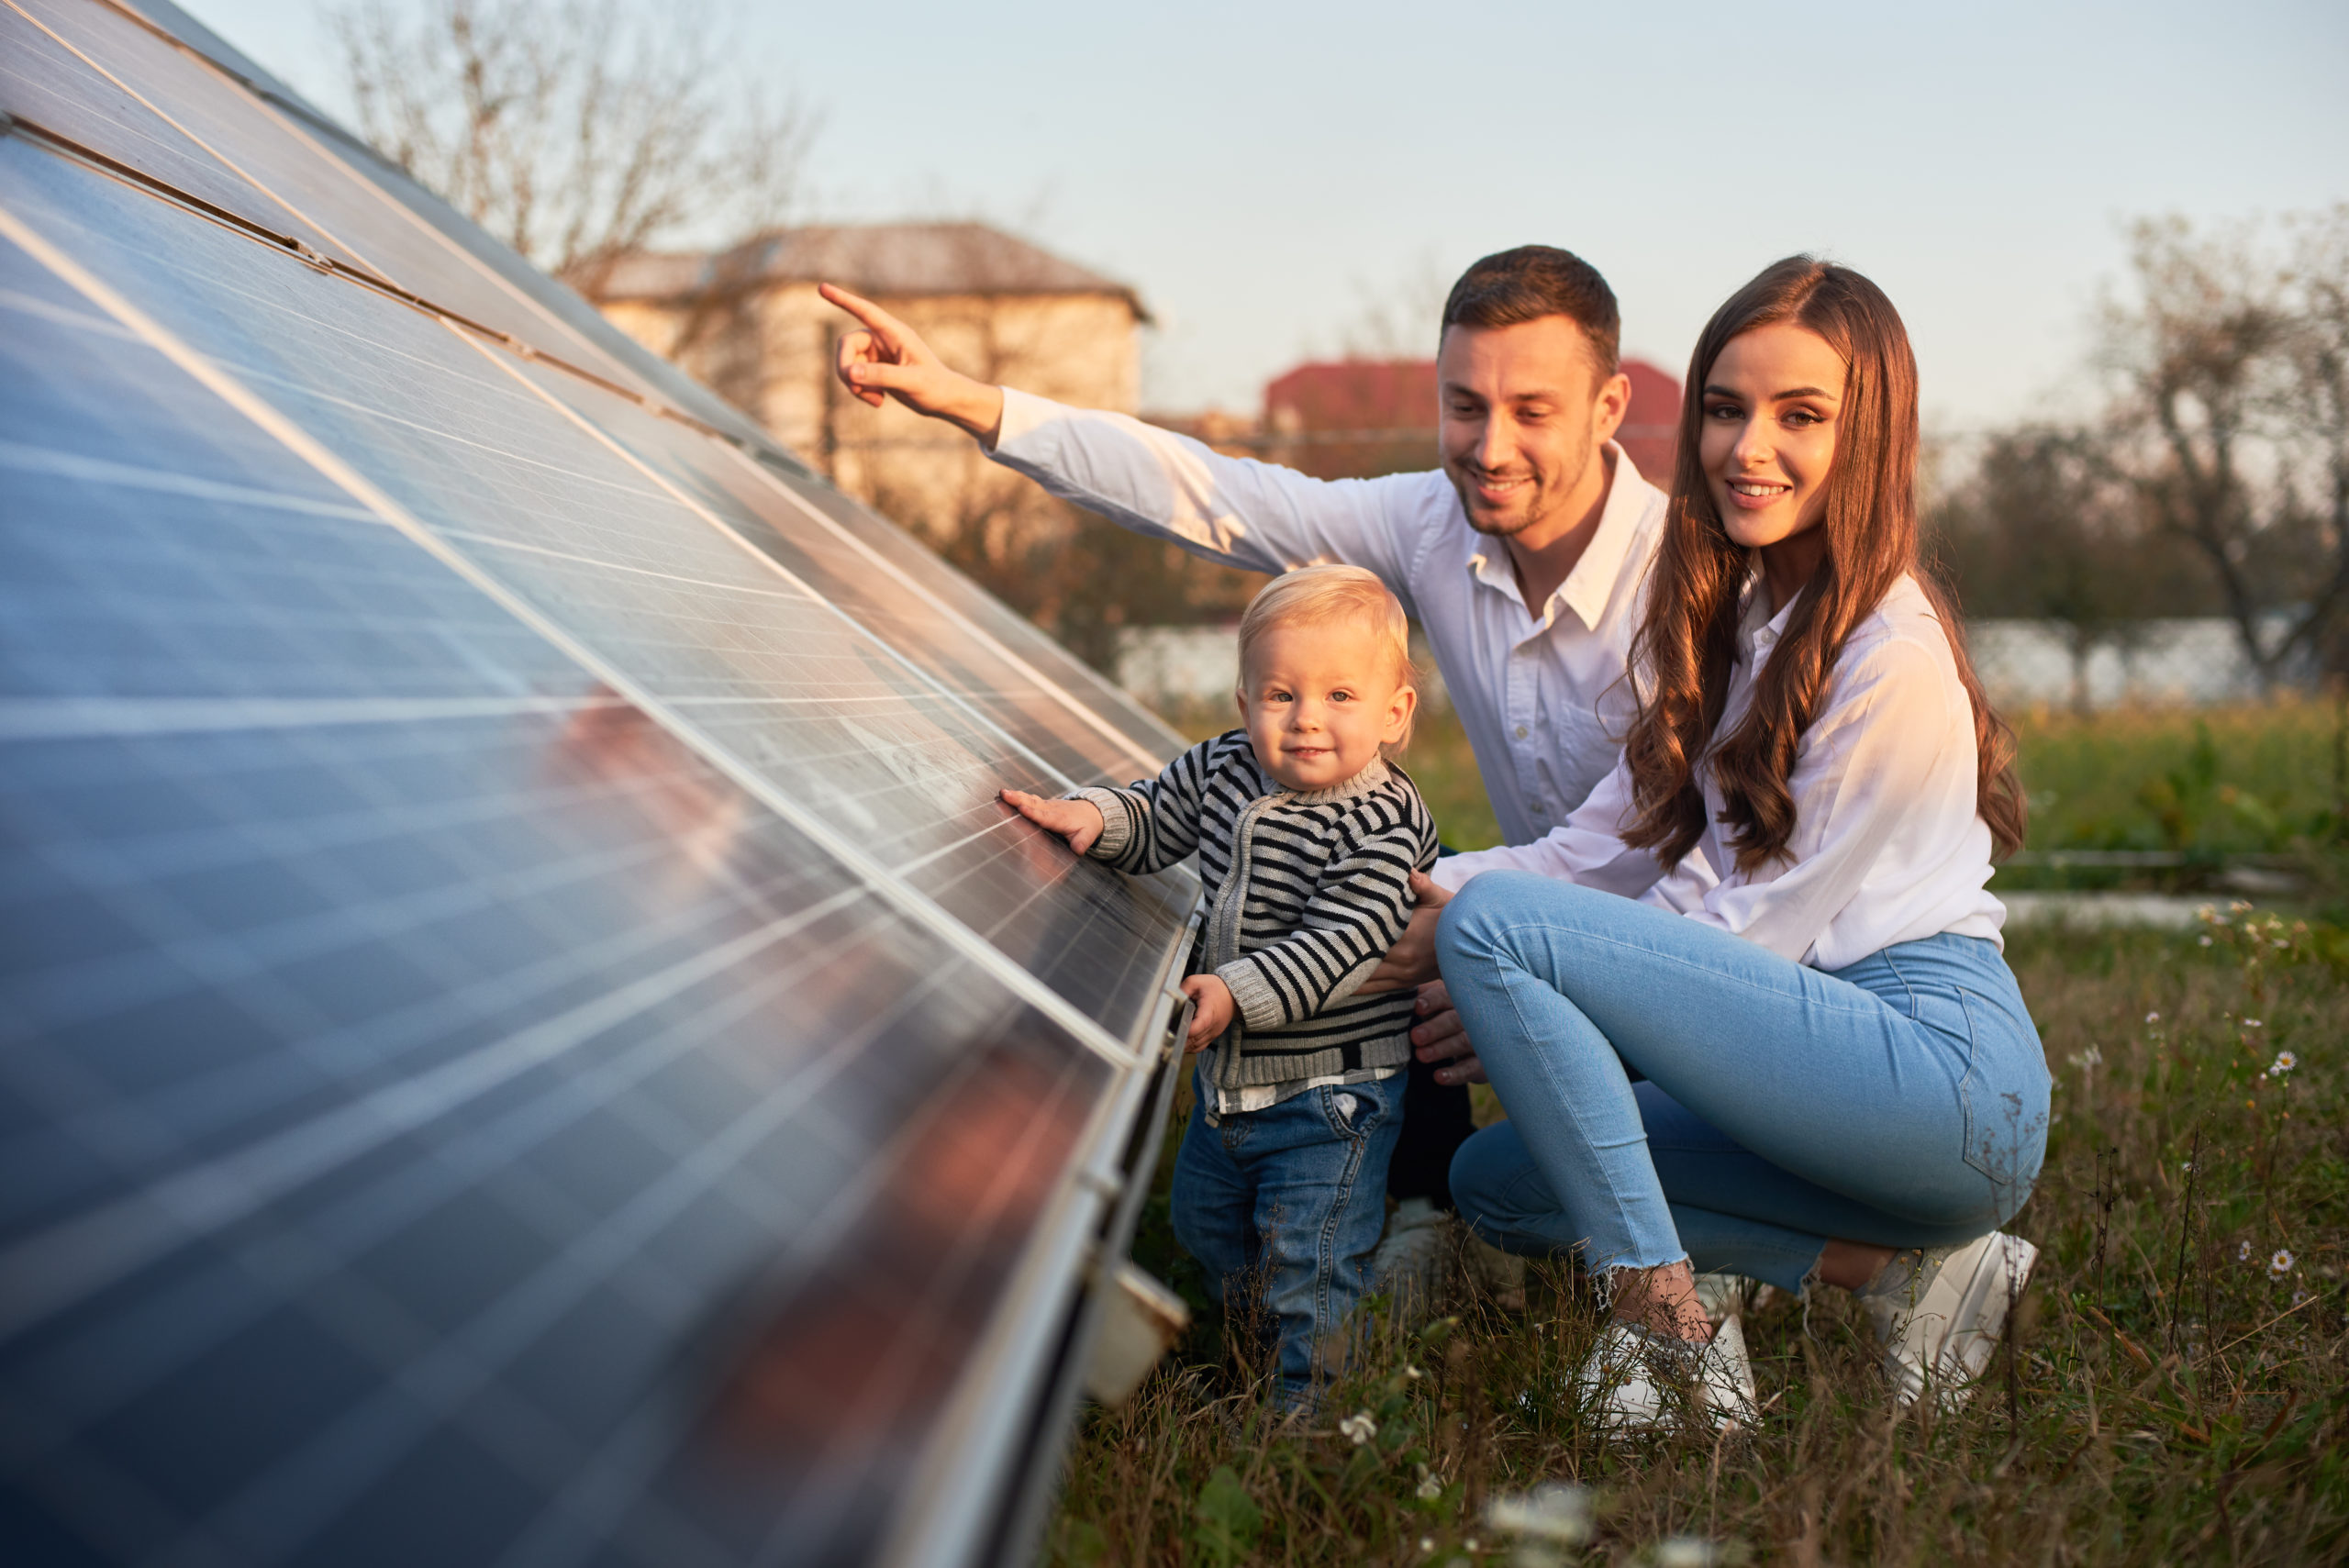 when is the best time to install solar panels